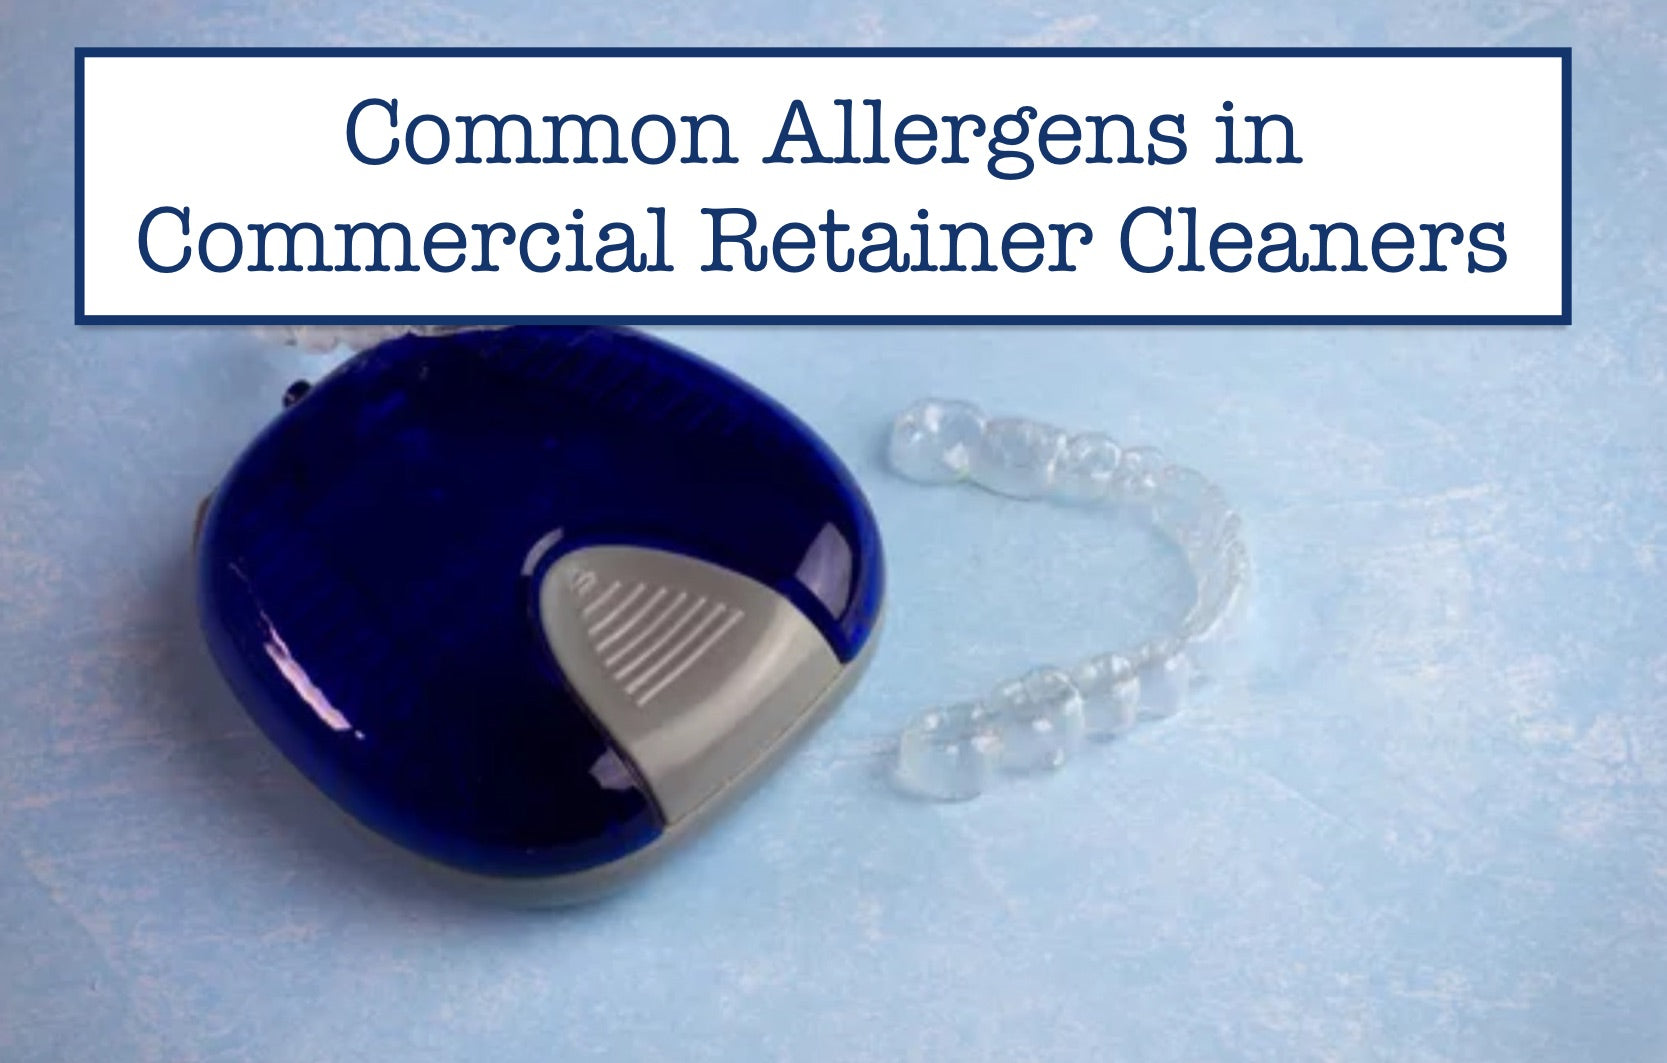 Common Allergens in Commercial Retainer Cleaners